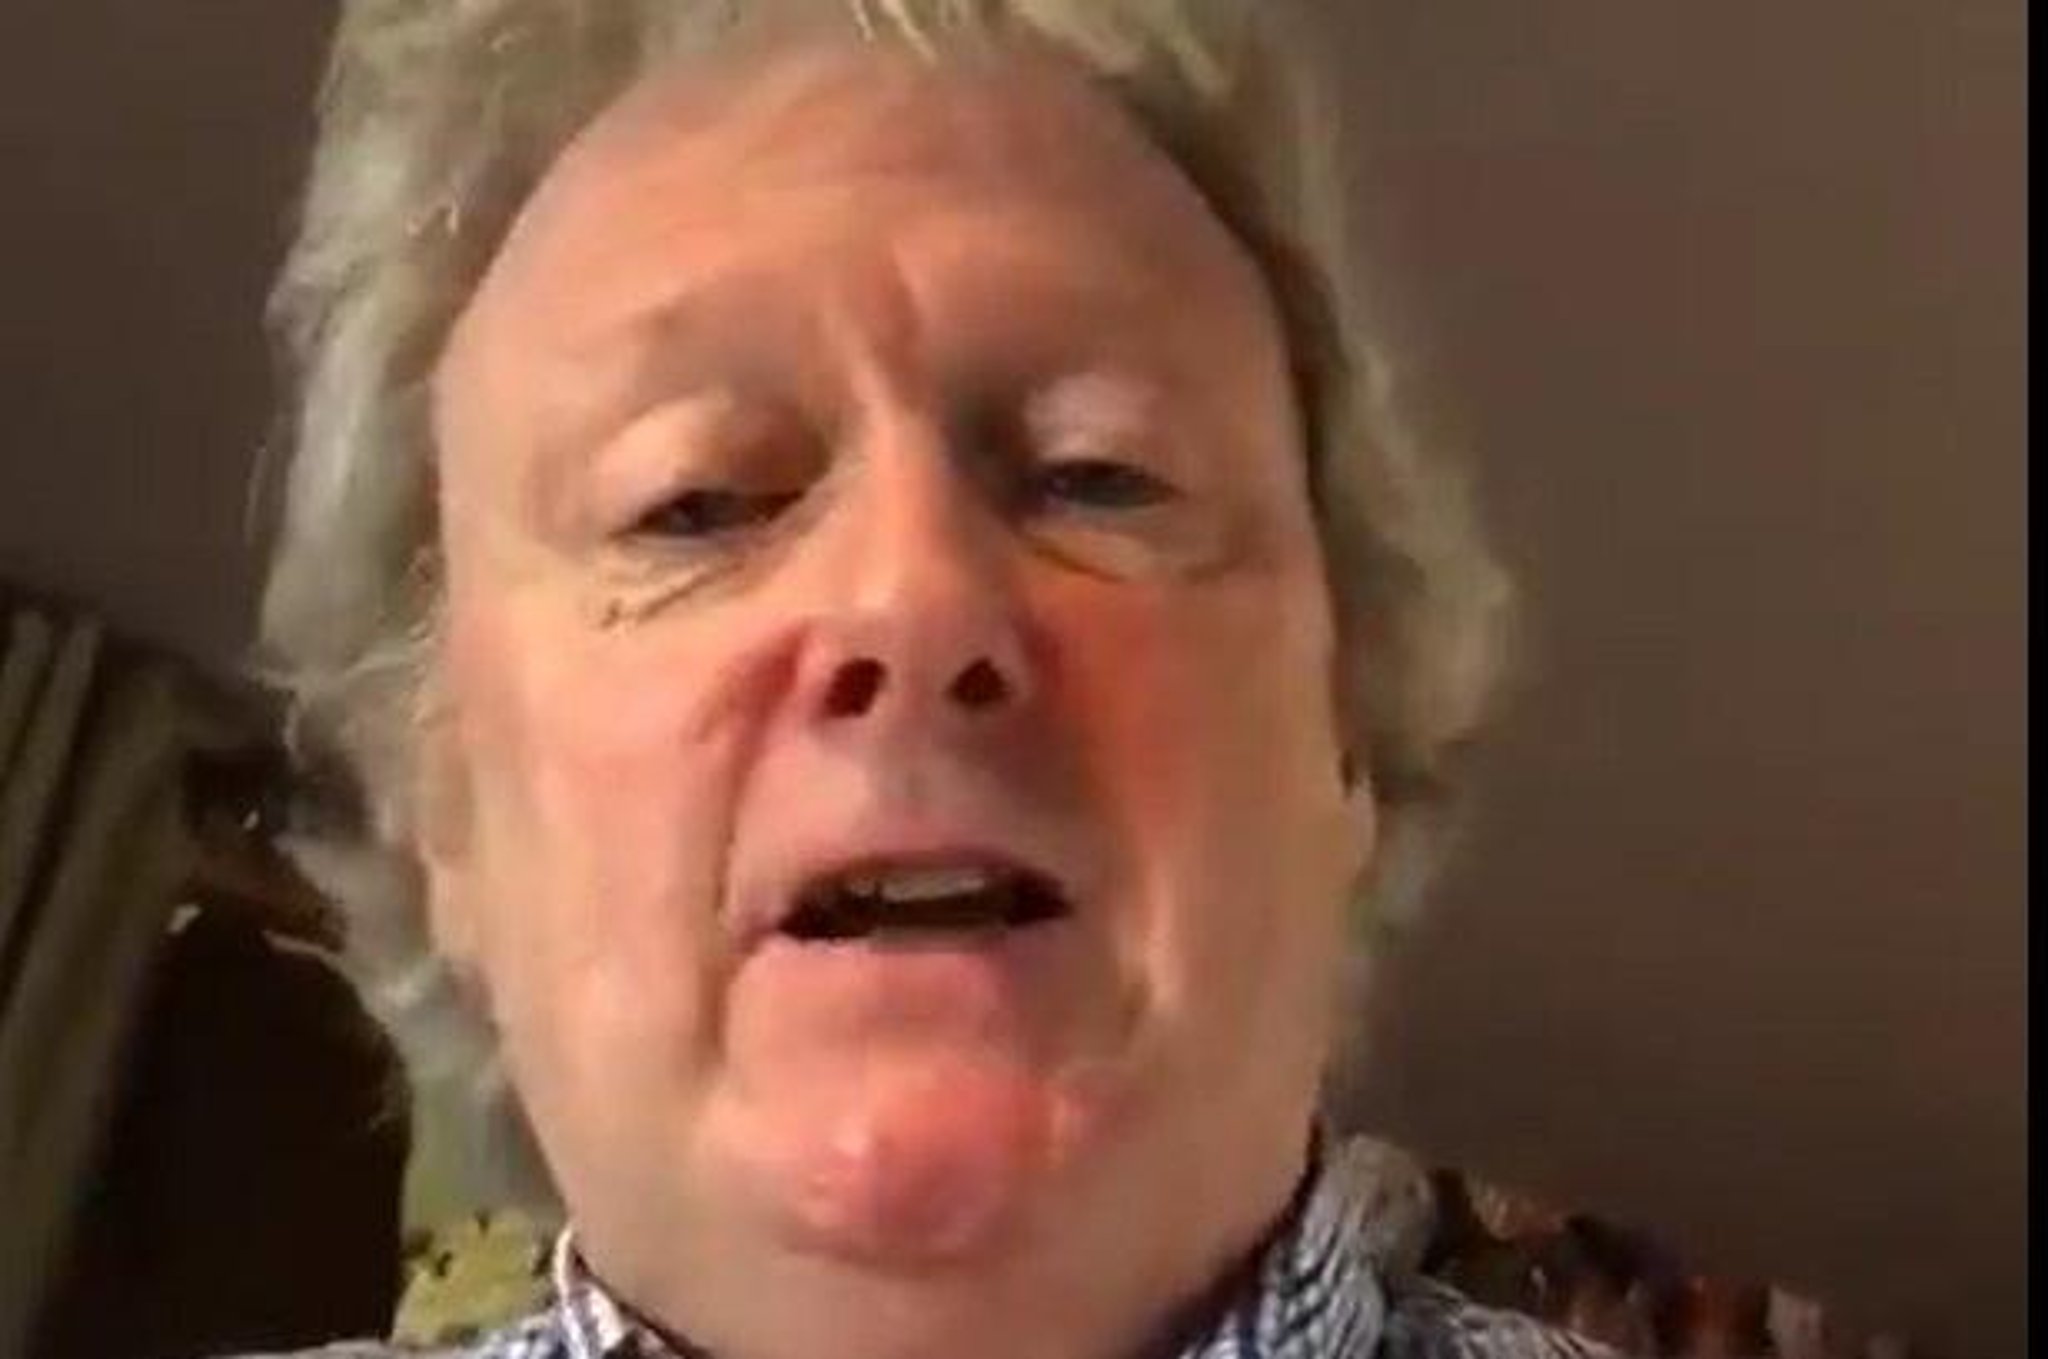 Charlie Lawson puts his money where his mouth is and promises to walk portion of 600 miles for Beyond the Battlefield charity - two lads who planned walk 'are bloody barking'